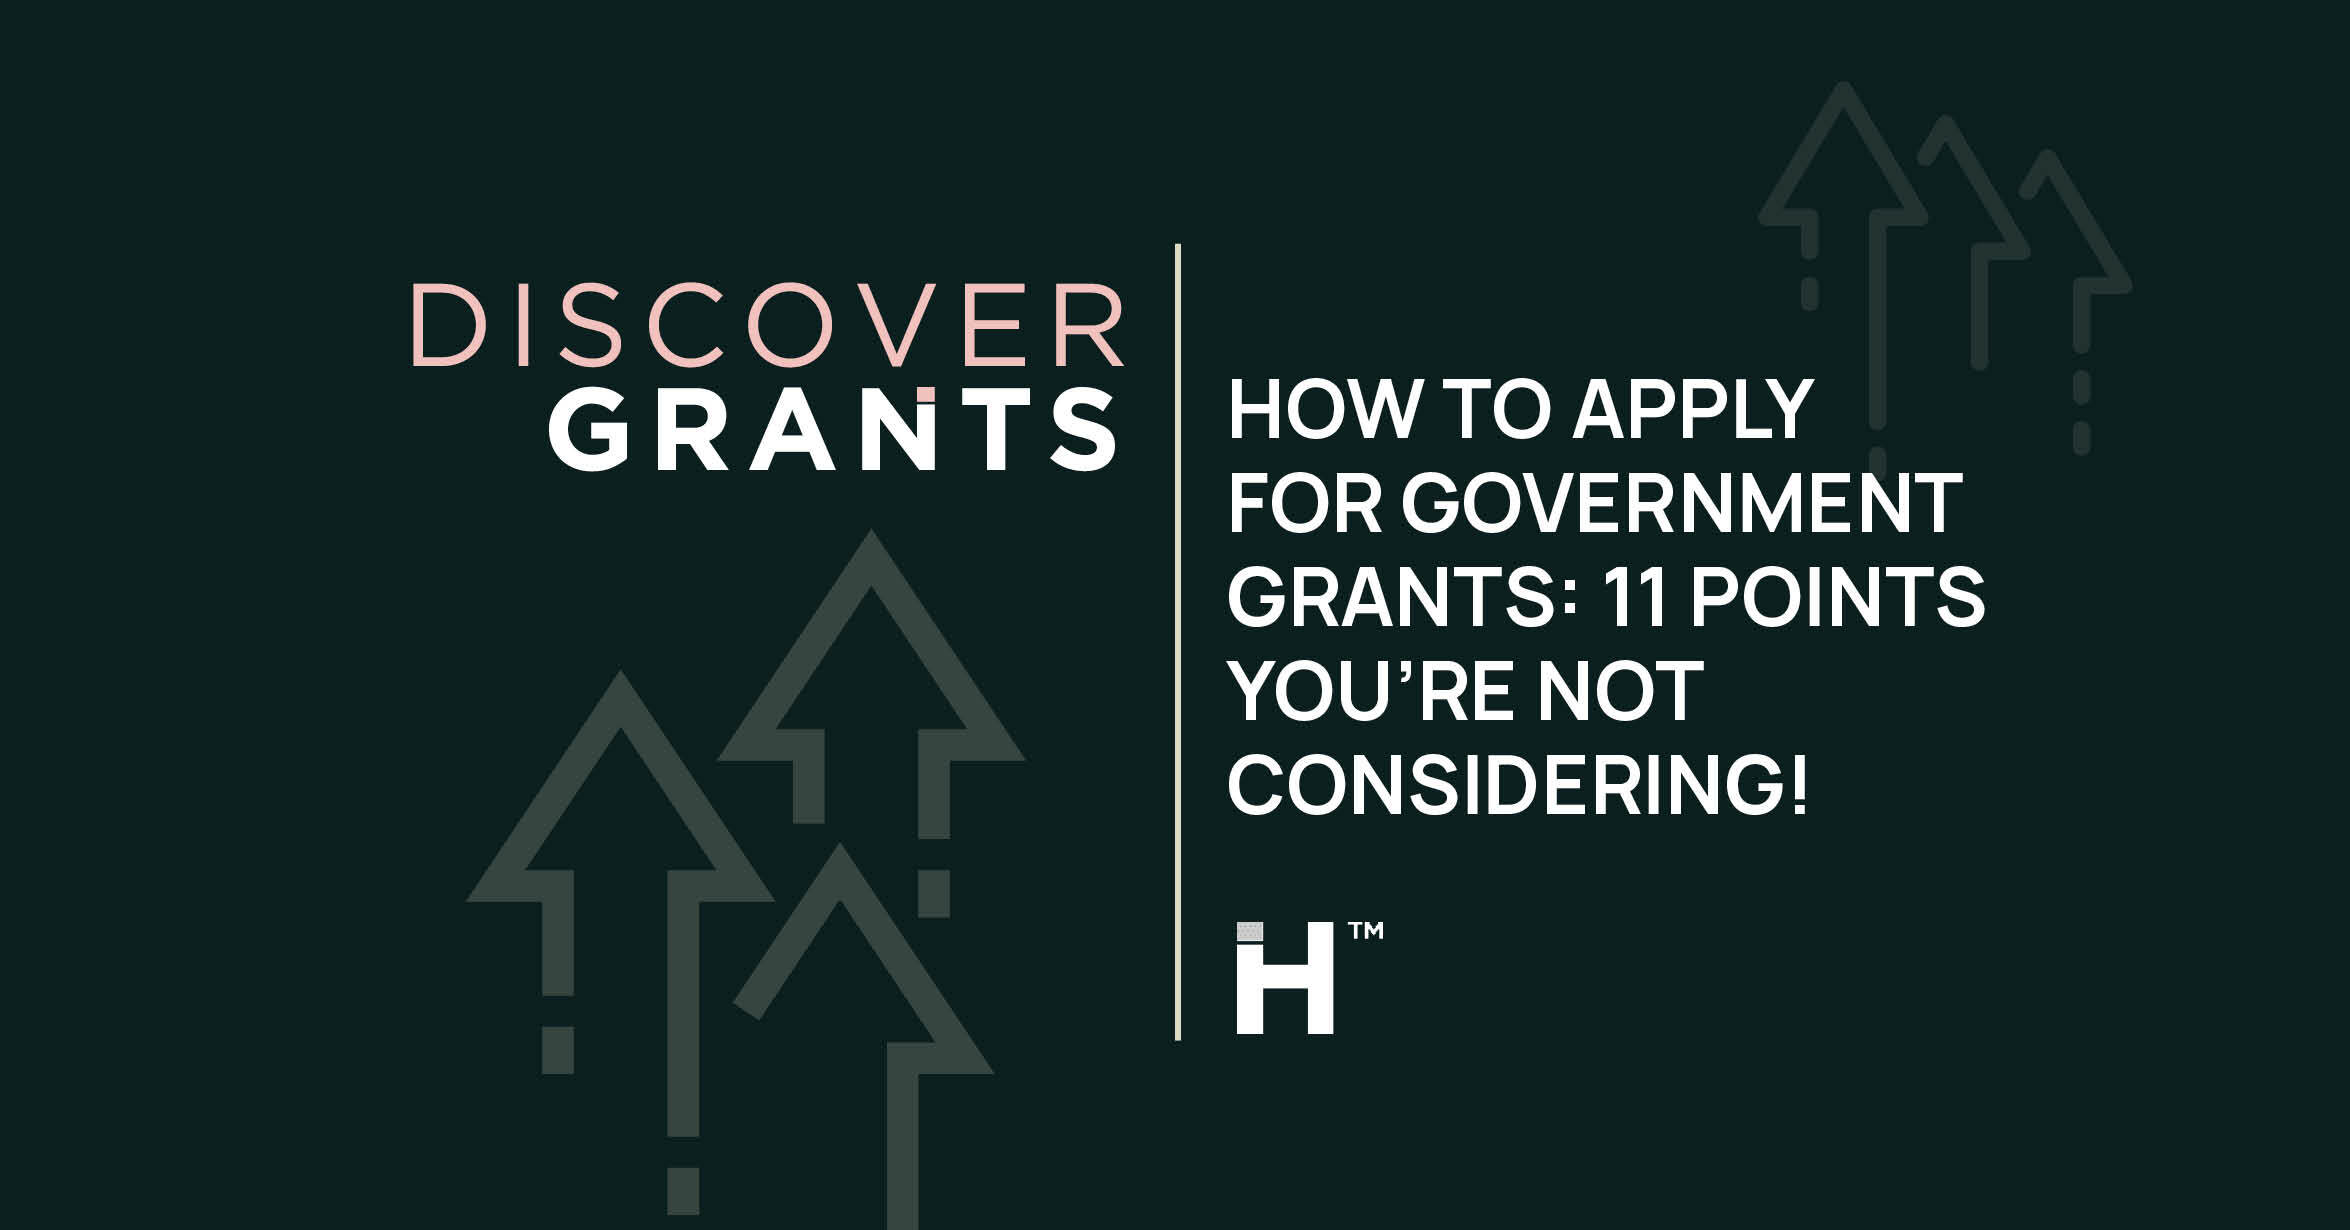 How to apply for government grants